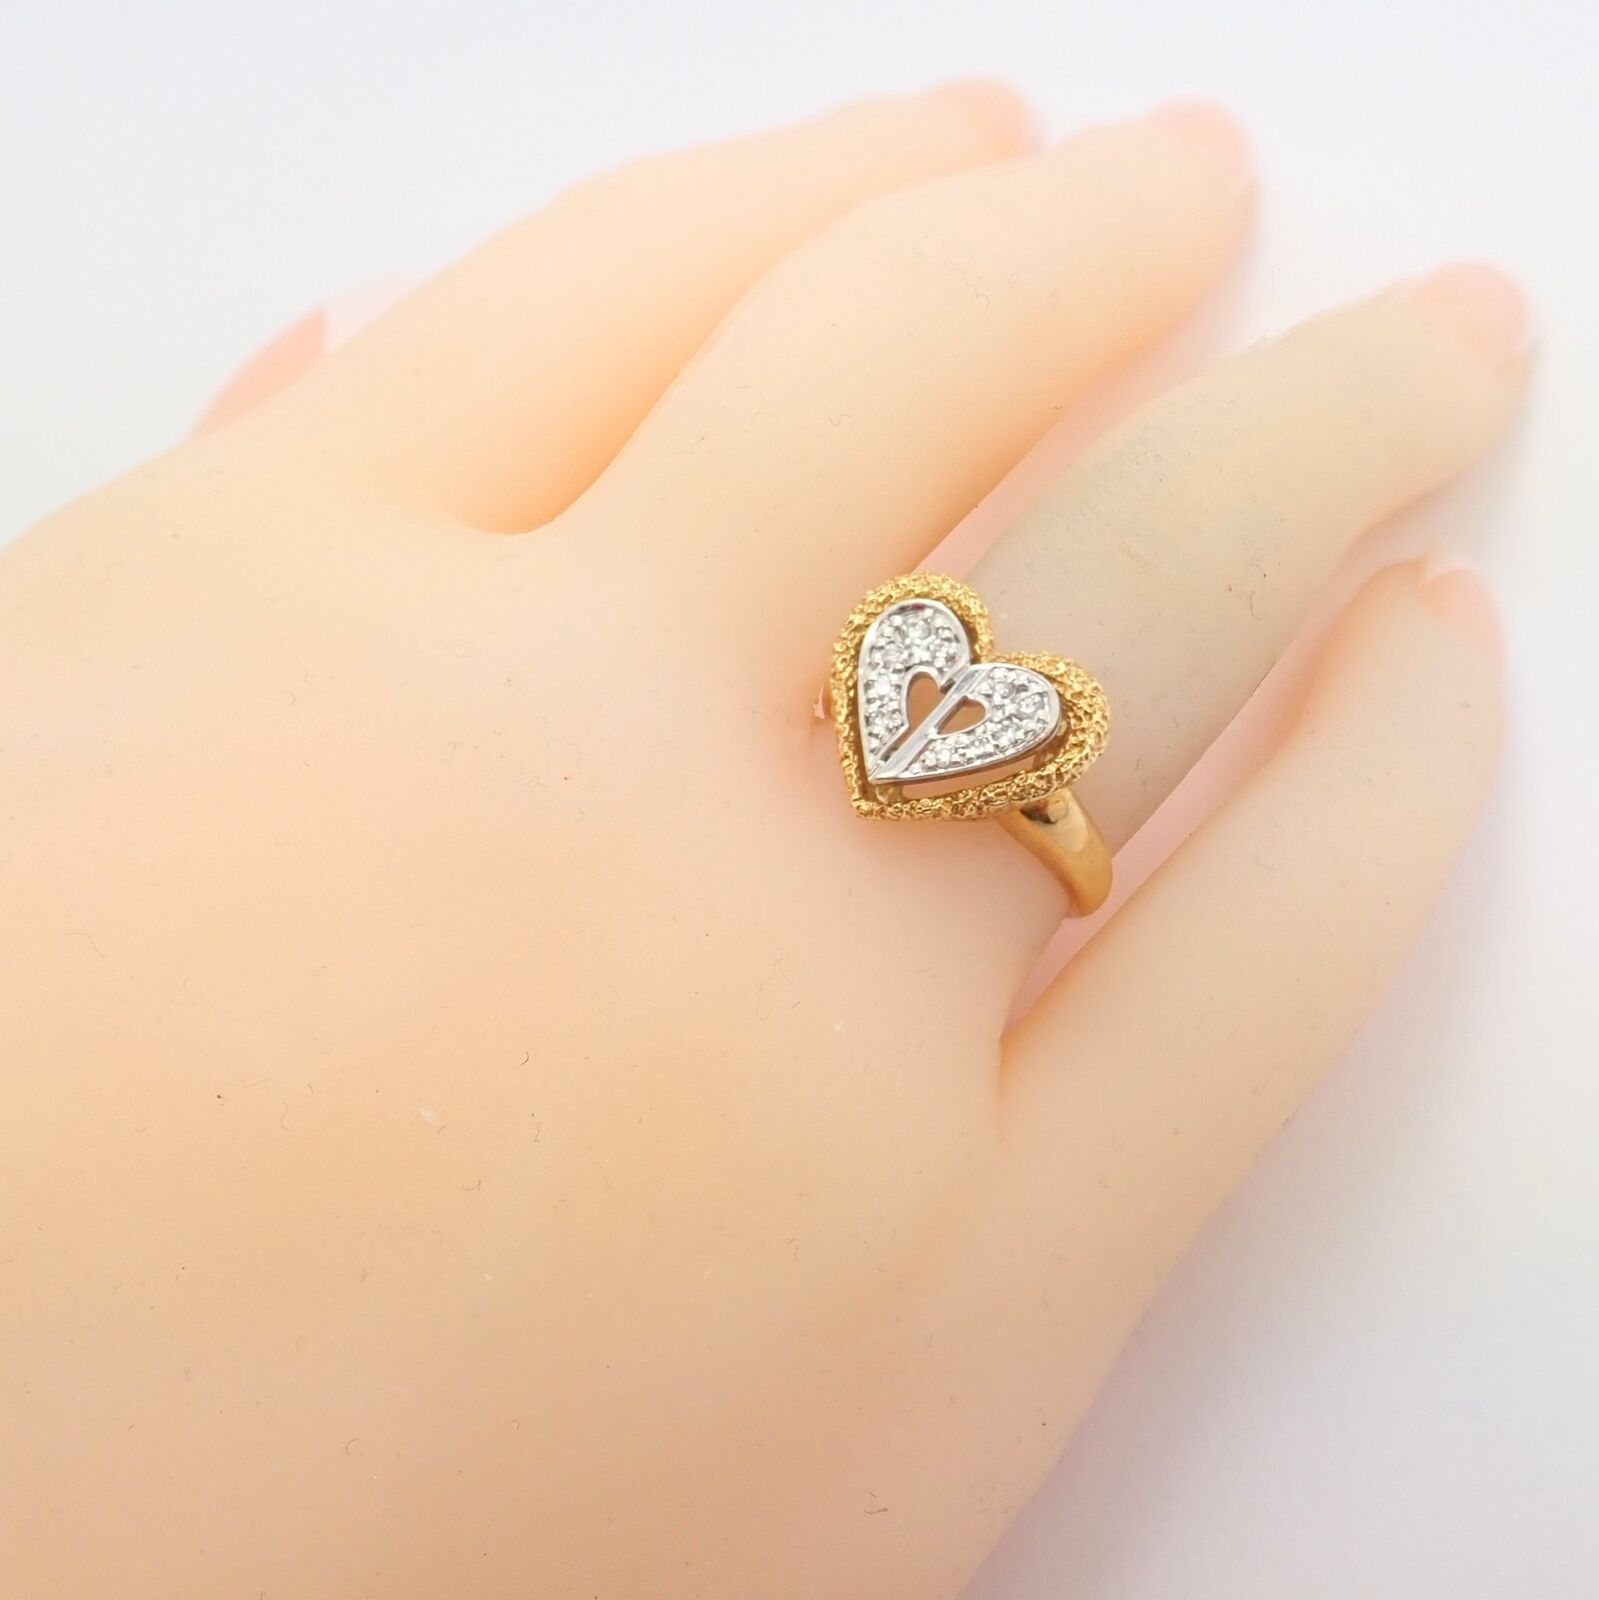 Christian Dior Jewelry & Watches:Fine Jewelry:Rings Authentic! Christian Dior 18k Yellow + White Gold Diamond Heart Ring